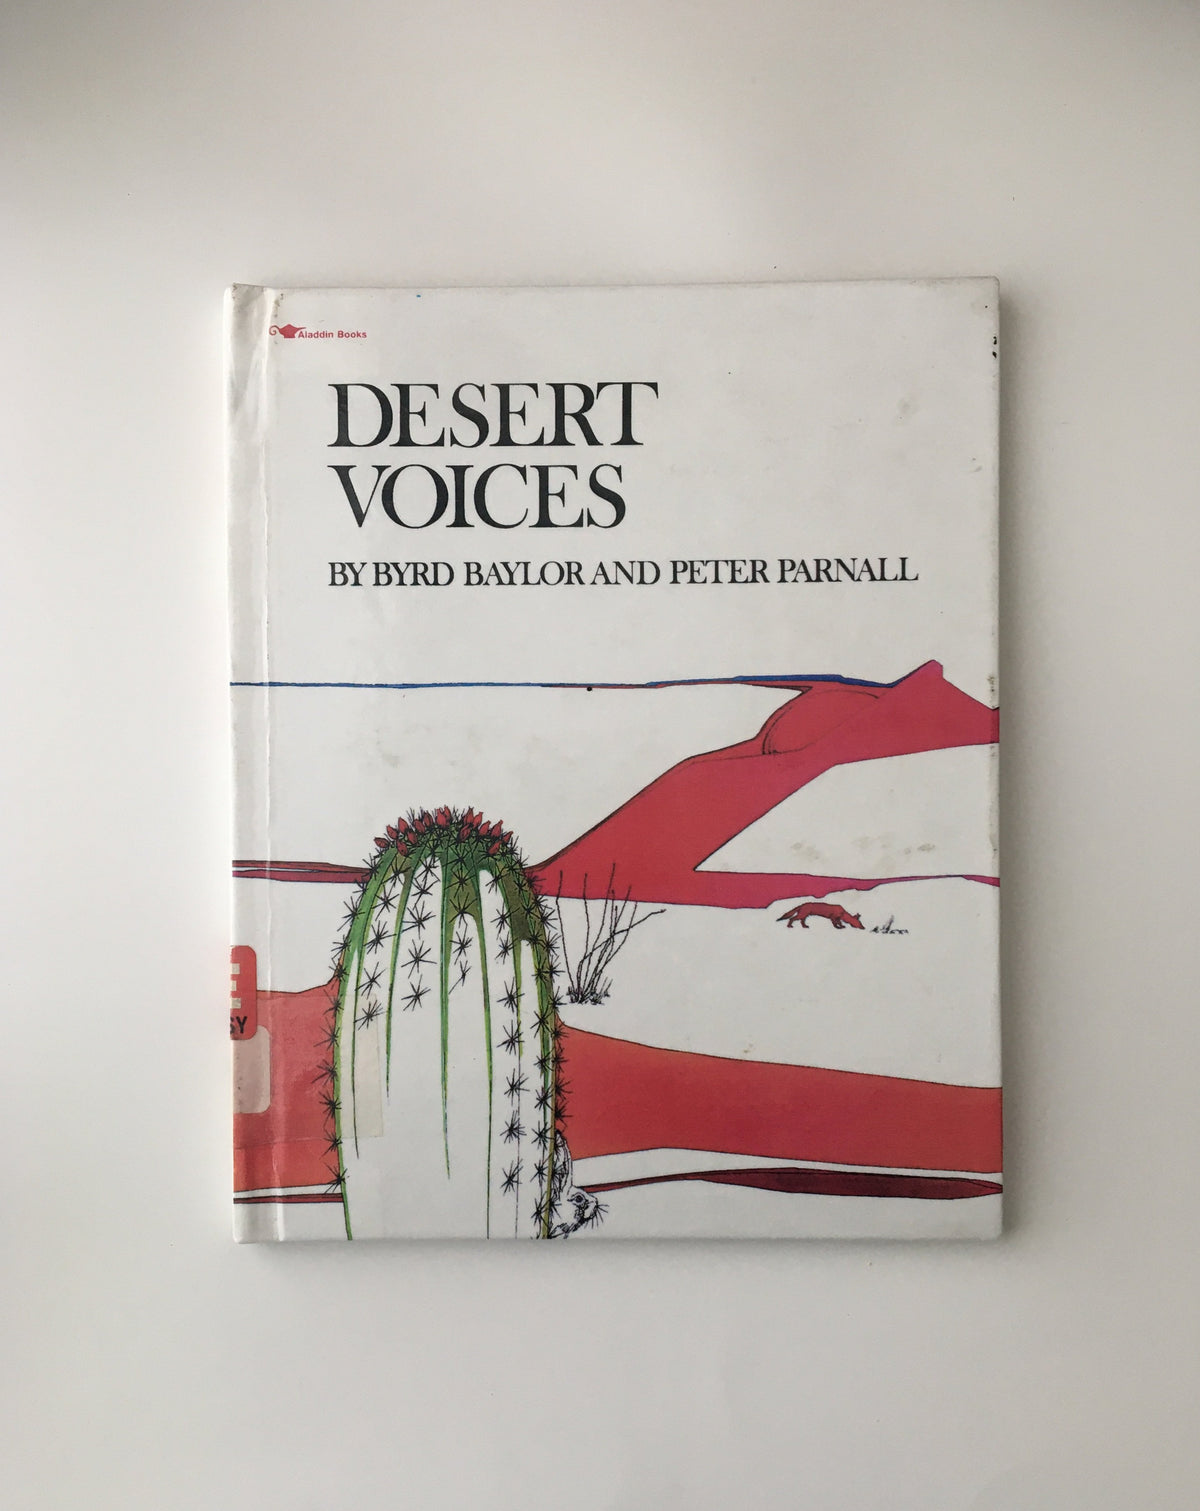 Desert Voices by Byrd Baylor and Peter Parnall